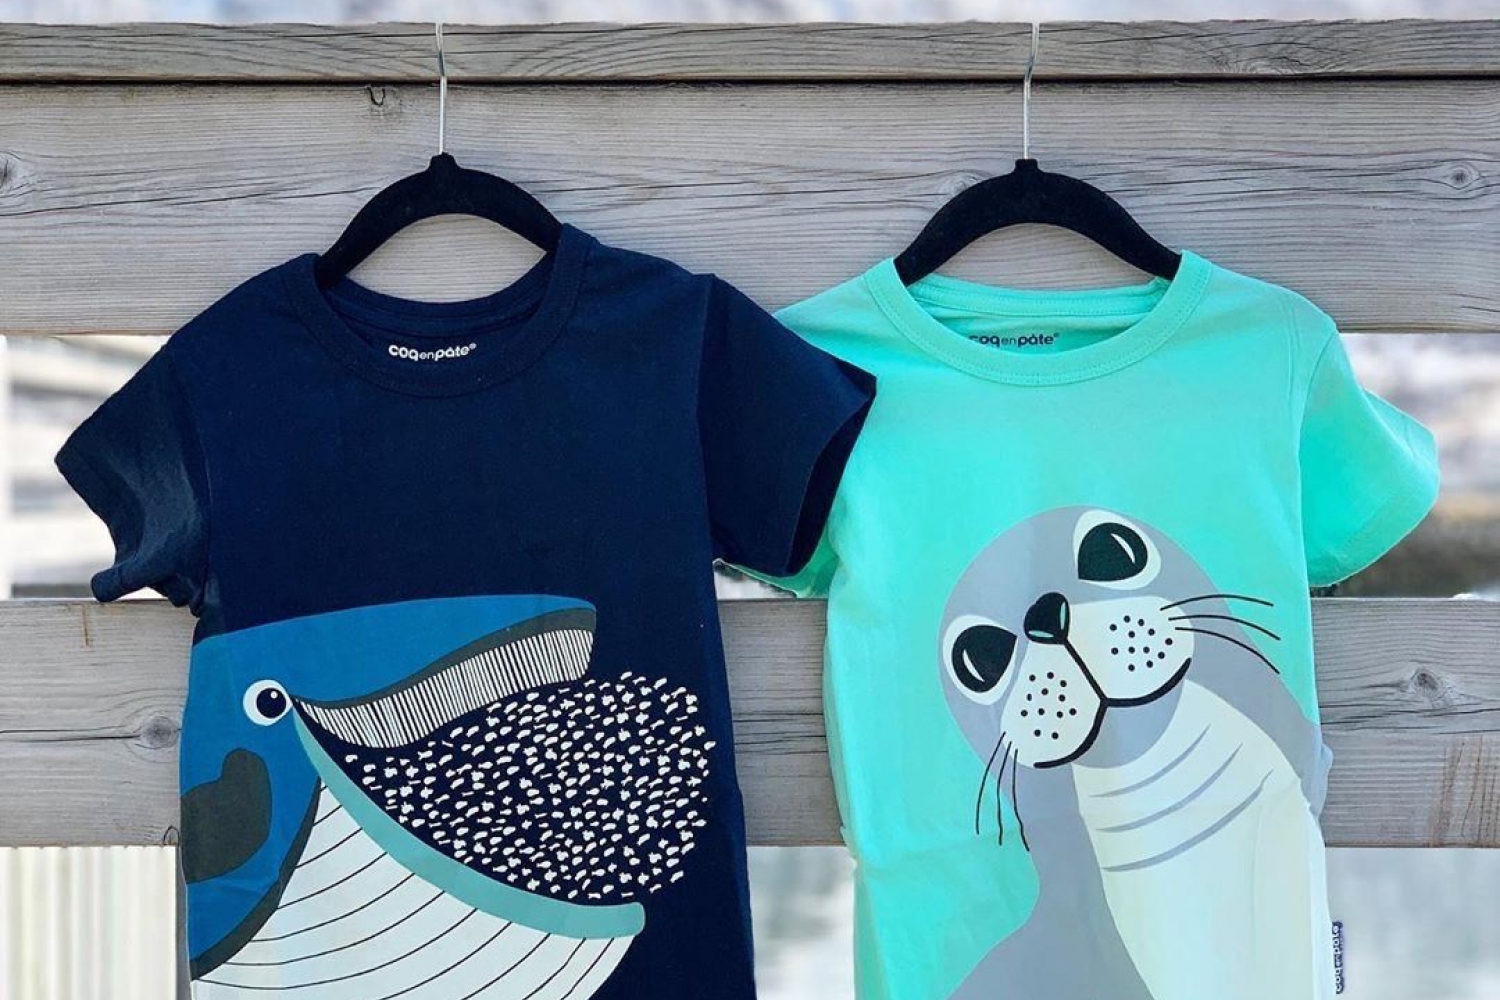 One t-shirt with a whale print and one with a seal print